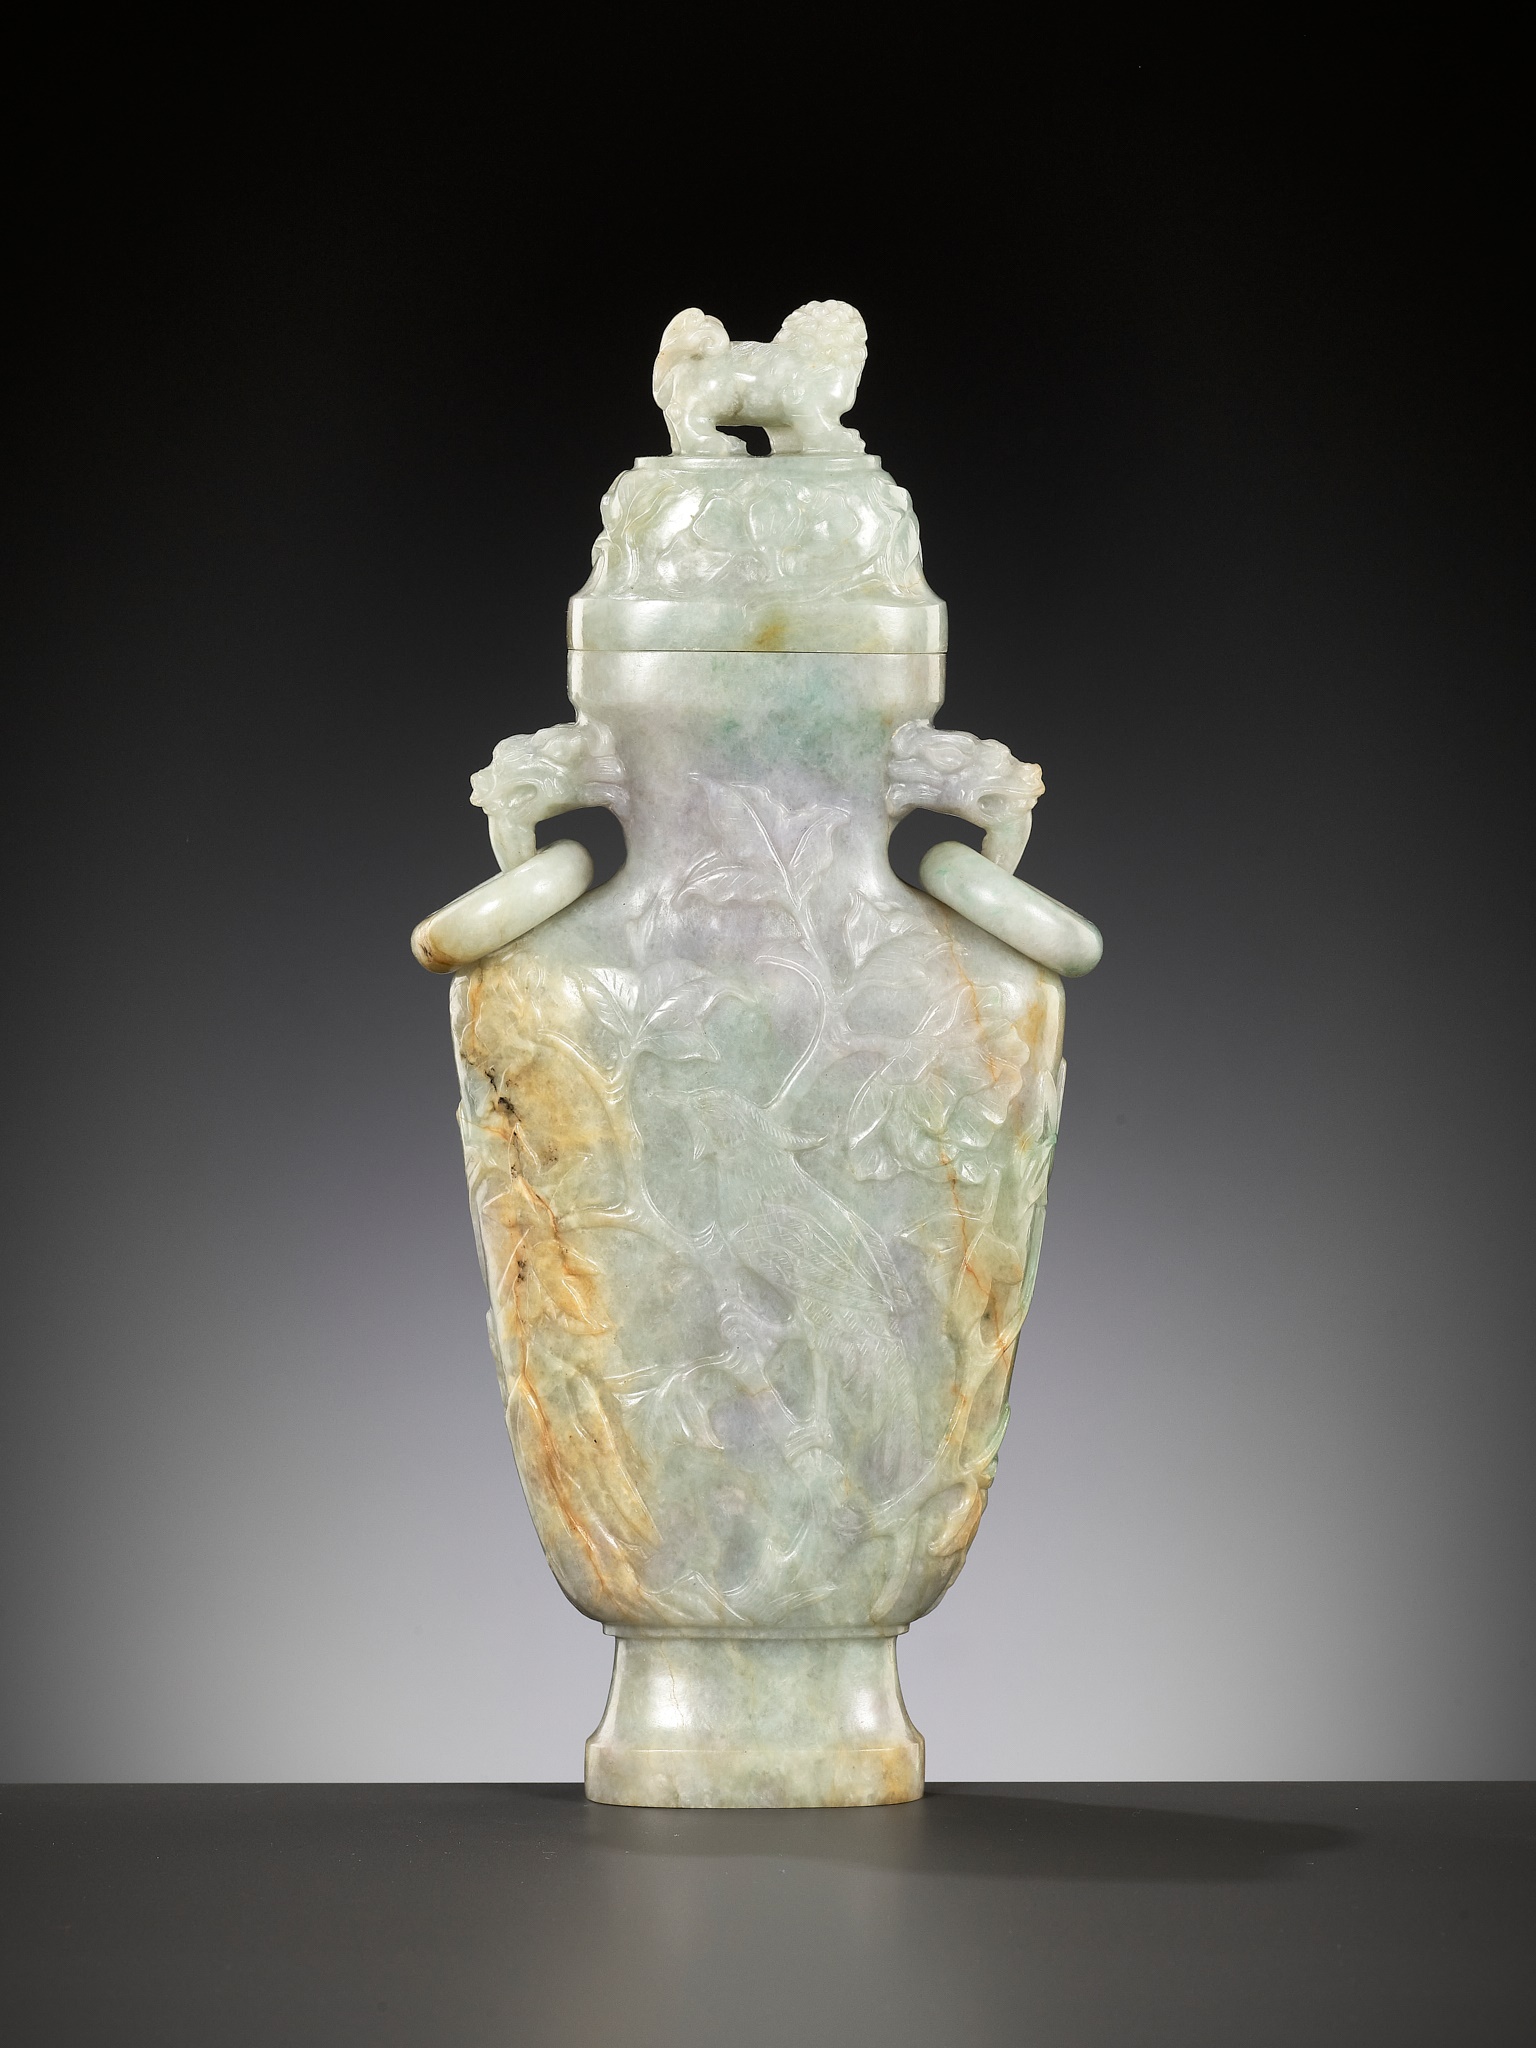 A JADEITE BALUSTER VASE AND COVER, LATE QING DYNASTY TO REPUBLIC PERIOD - Image 9 of 12